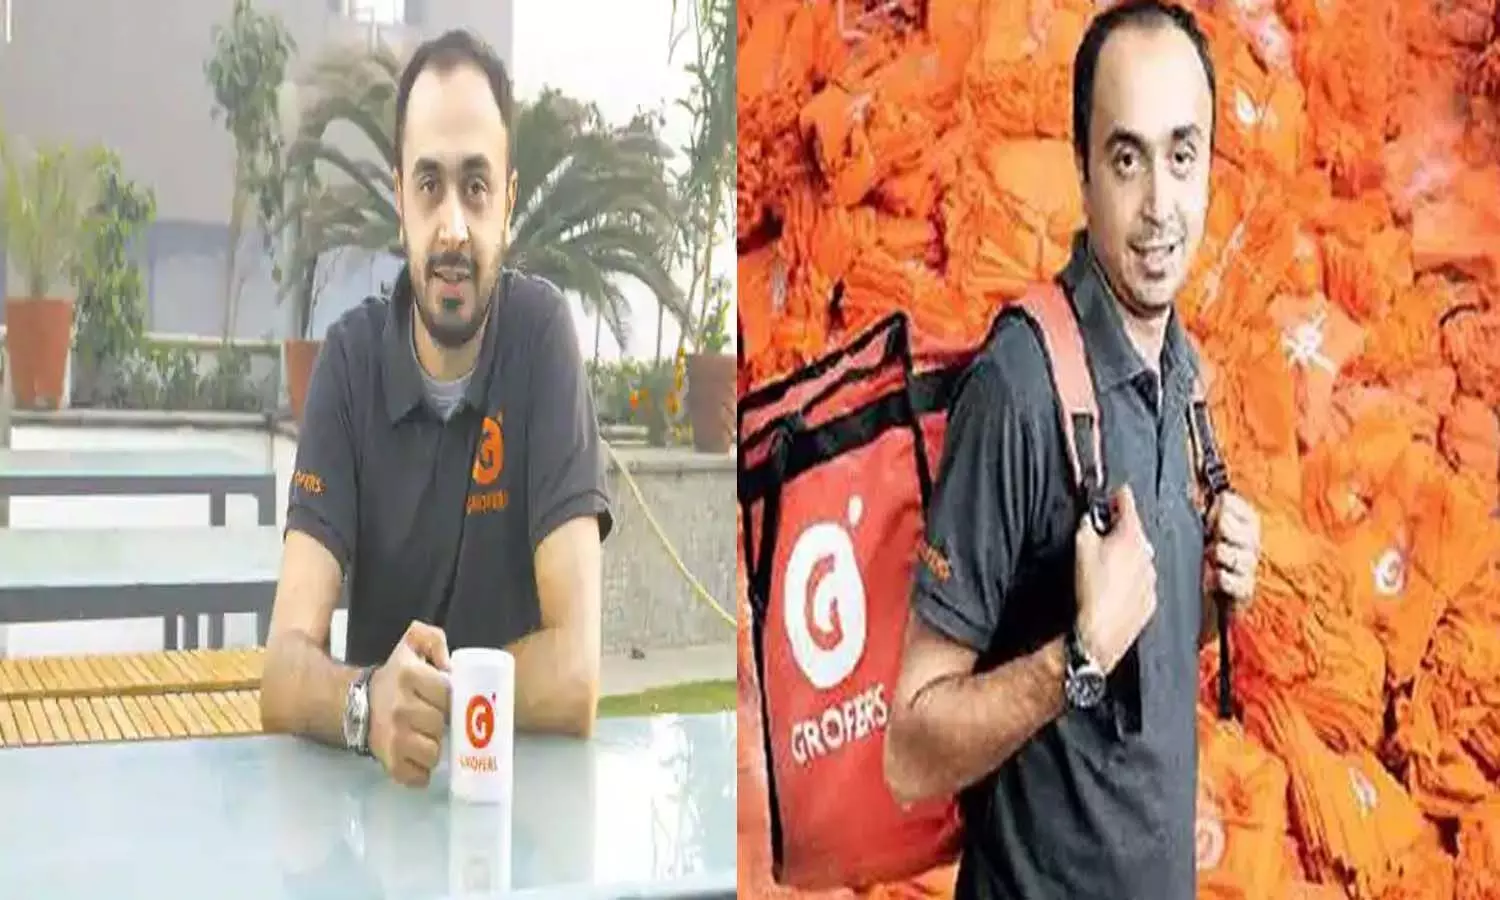 Fast Delivery On Blinkit: Battle For Fast Delivery In Online Stores, Grofers Changes Its Name